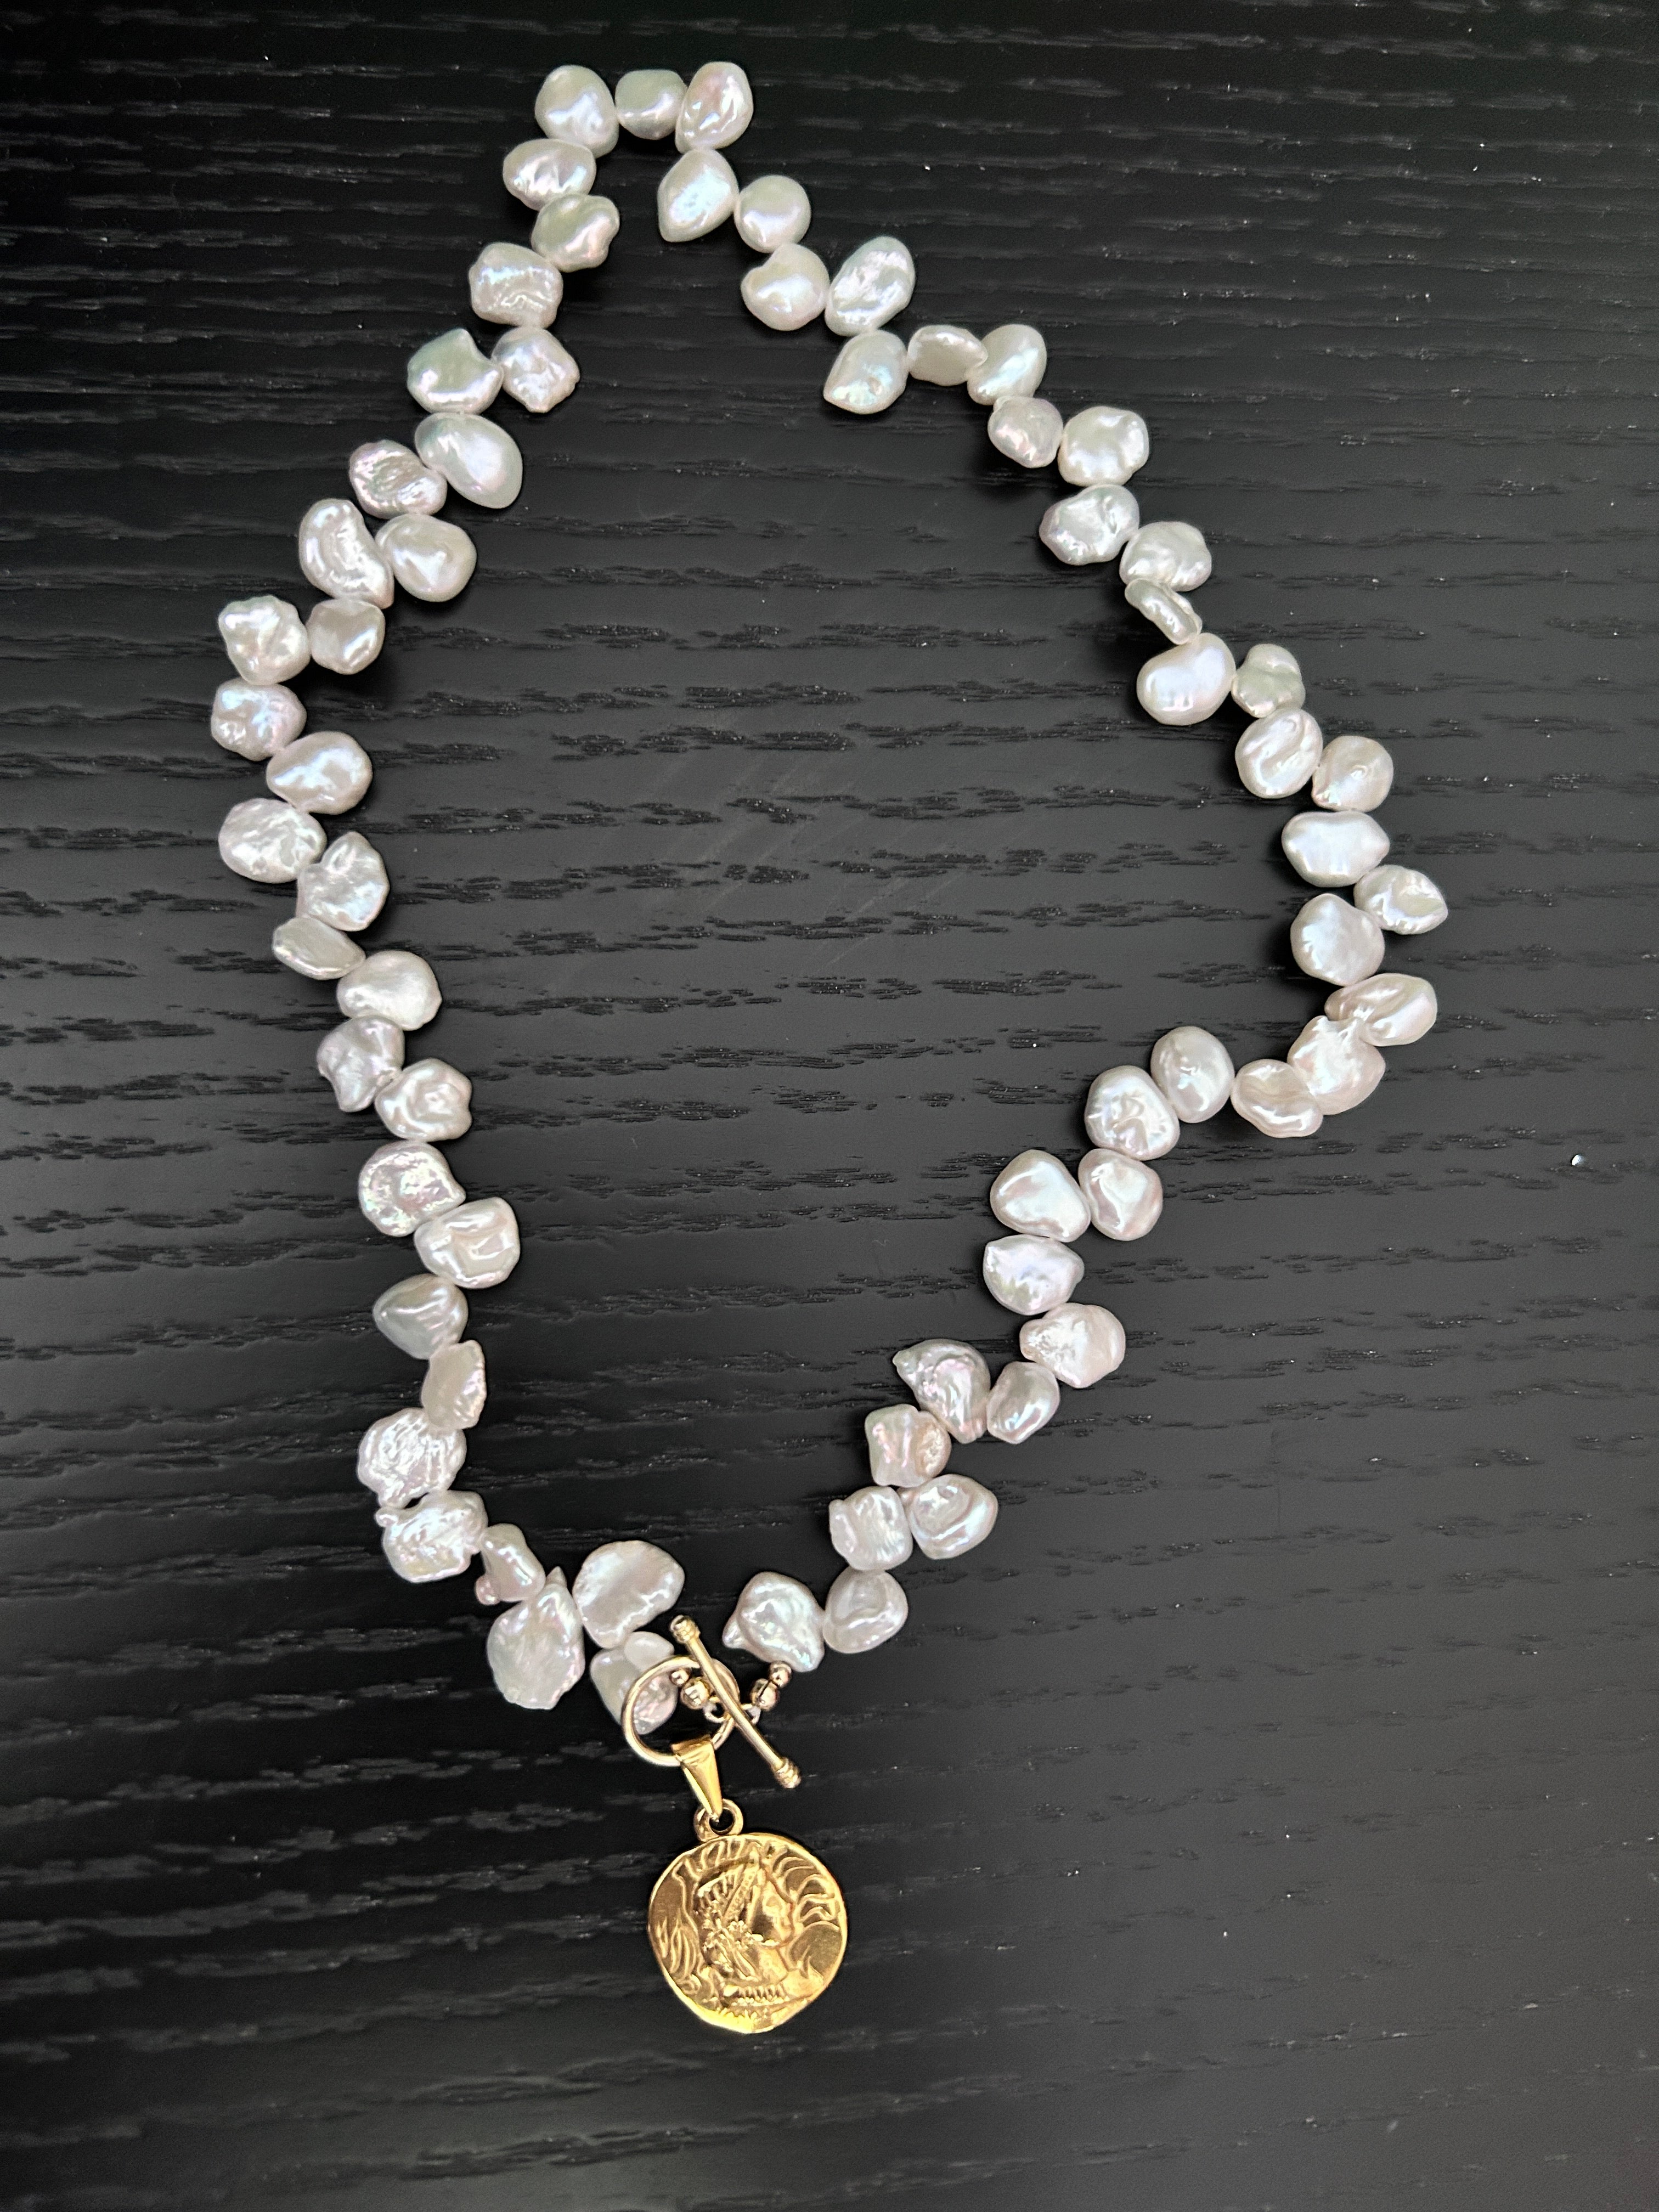 Gold Coin With Baby Baroque Pearls Flower Necklace